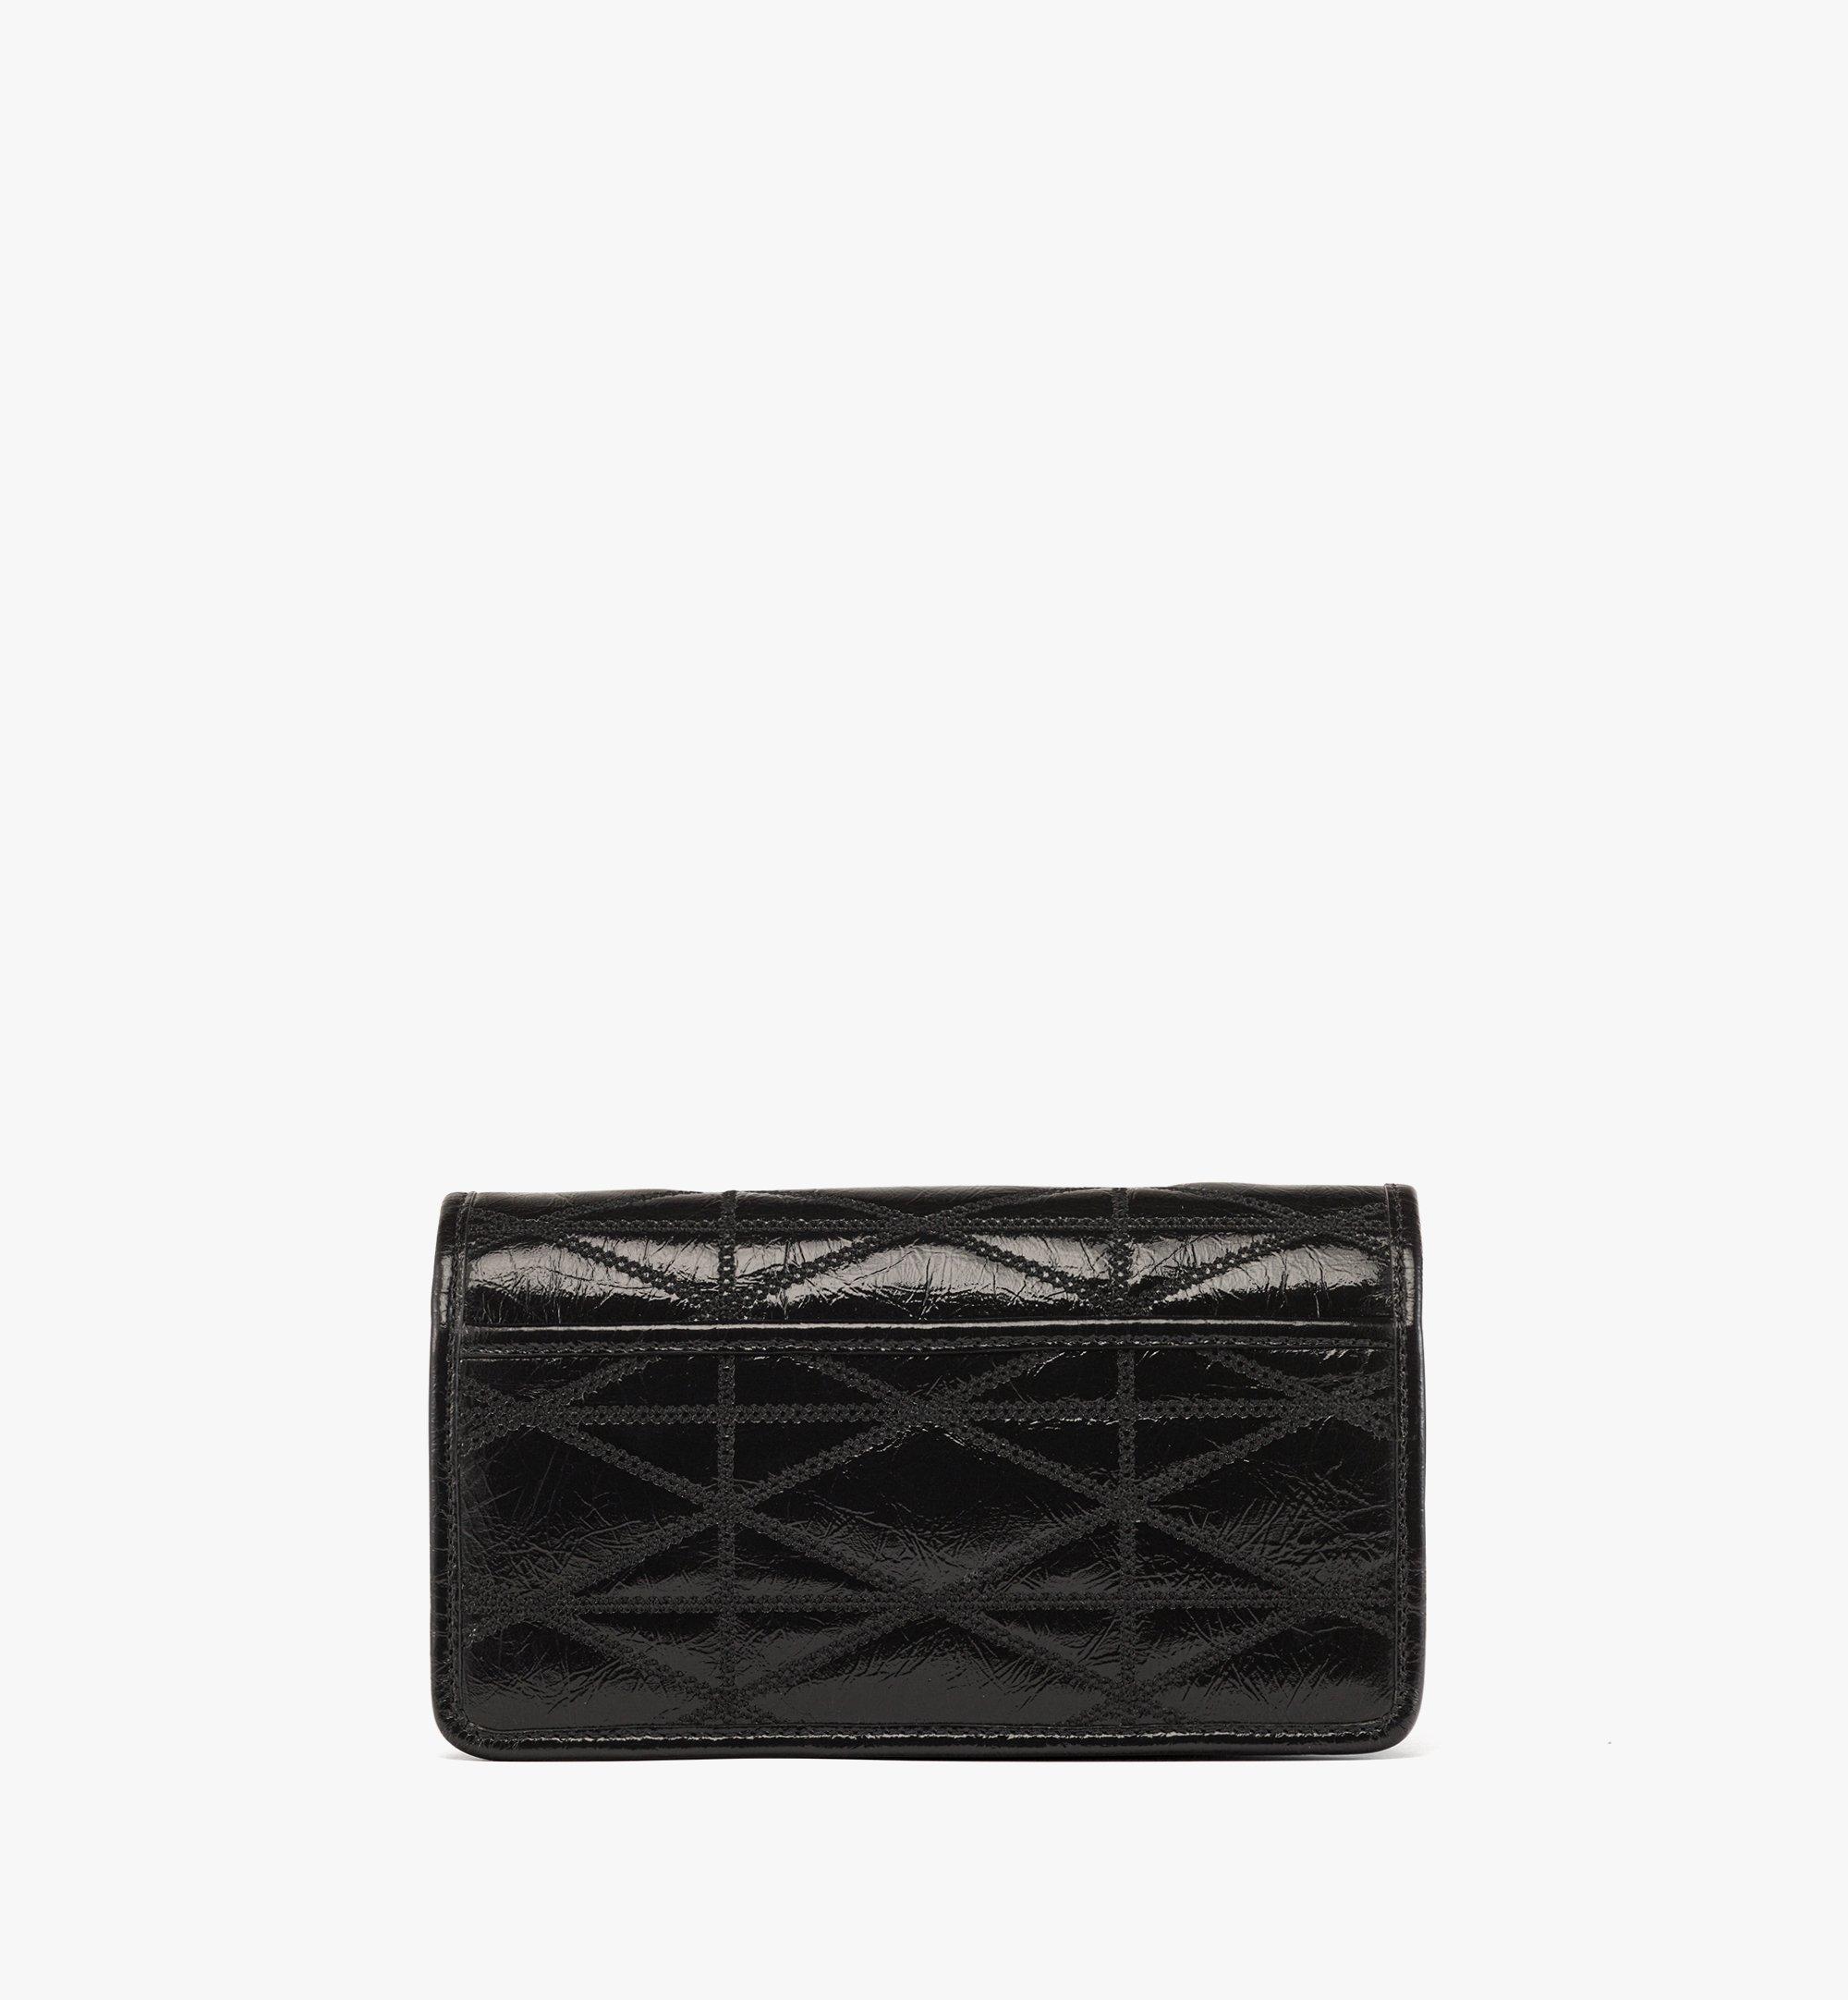 MCM Travia Quilted Chain Wallet in Crushed Leather Black MYLDALM01BK001 Alternate View 3